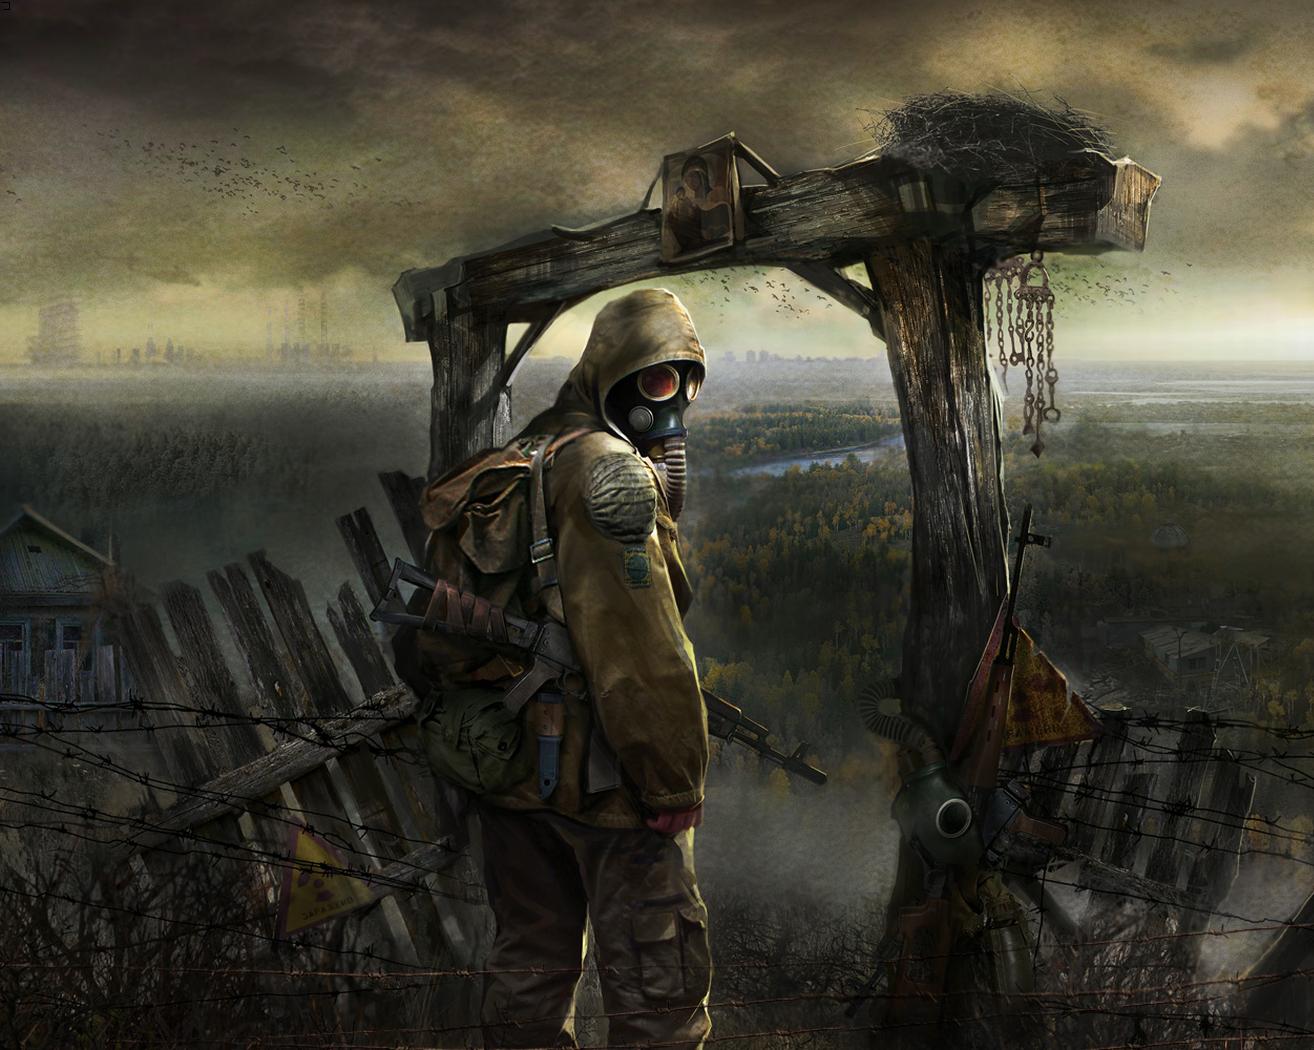 、STALKER、S.T.A.L.K.E.R.: Shadow of Chernobyl、、ンピュータゲーム、ゲーム、